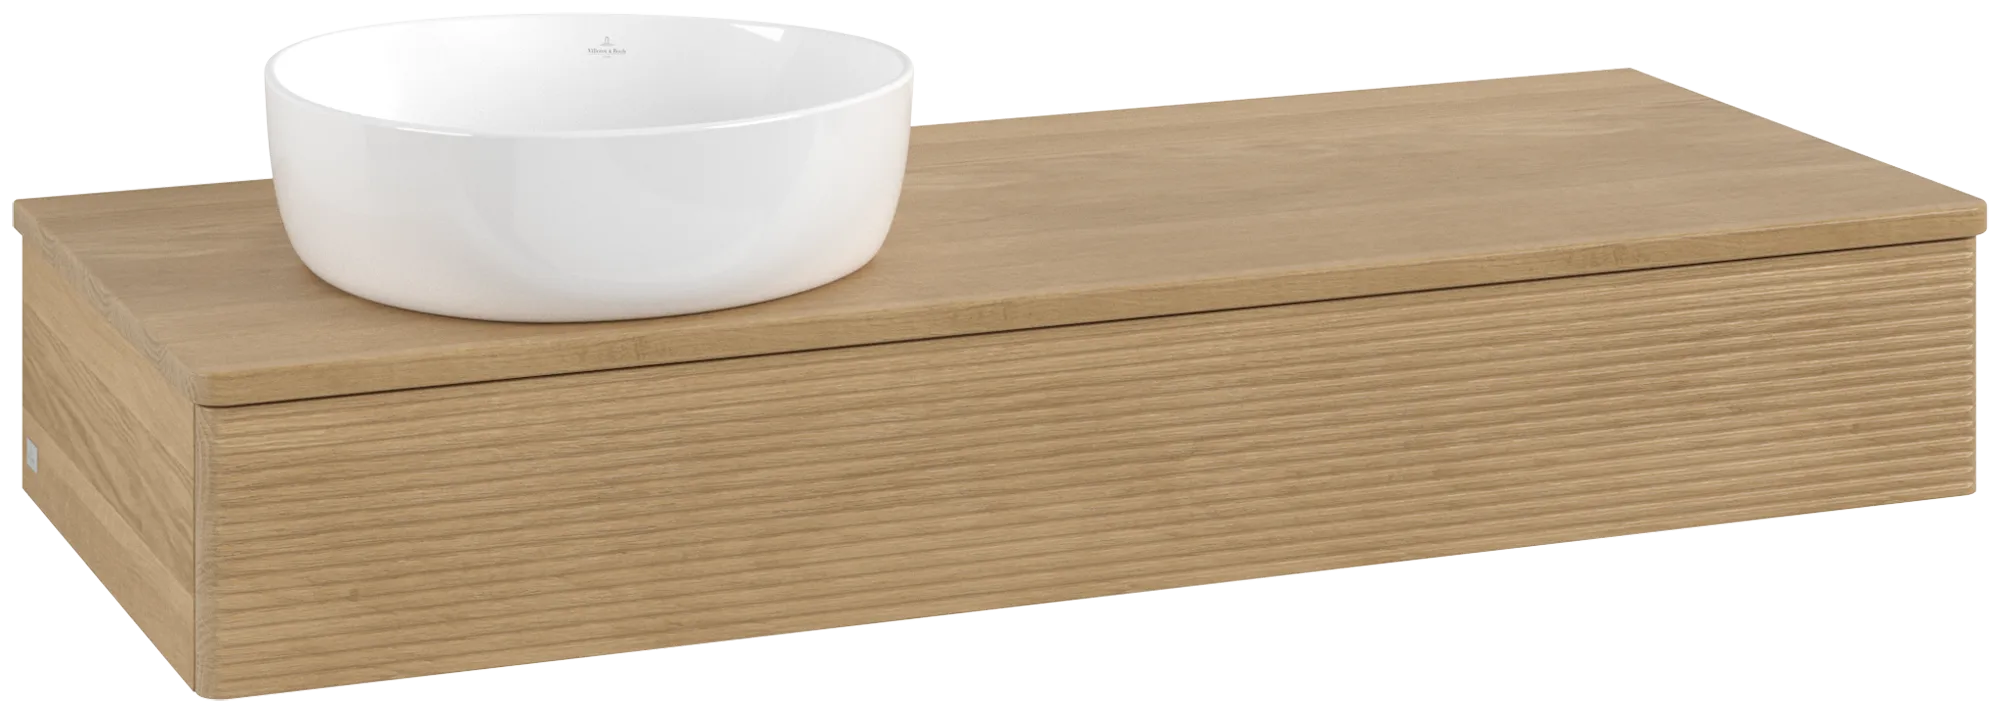 VILLEROY BOCH Antao Vanity unit, with lighting, 1 pull-out compartment, 1200 x 190 x 500 mm, Front with grain texture, Honey Oak / Honey Oak #L11111HN resmi